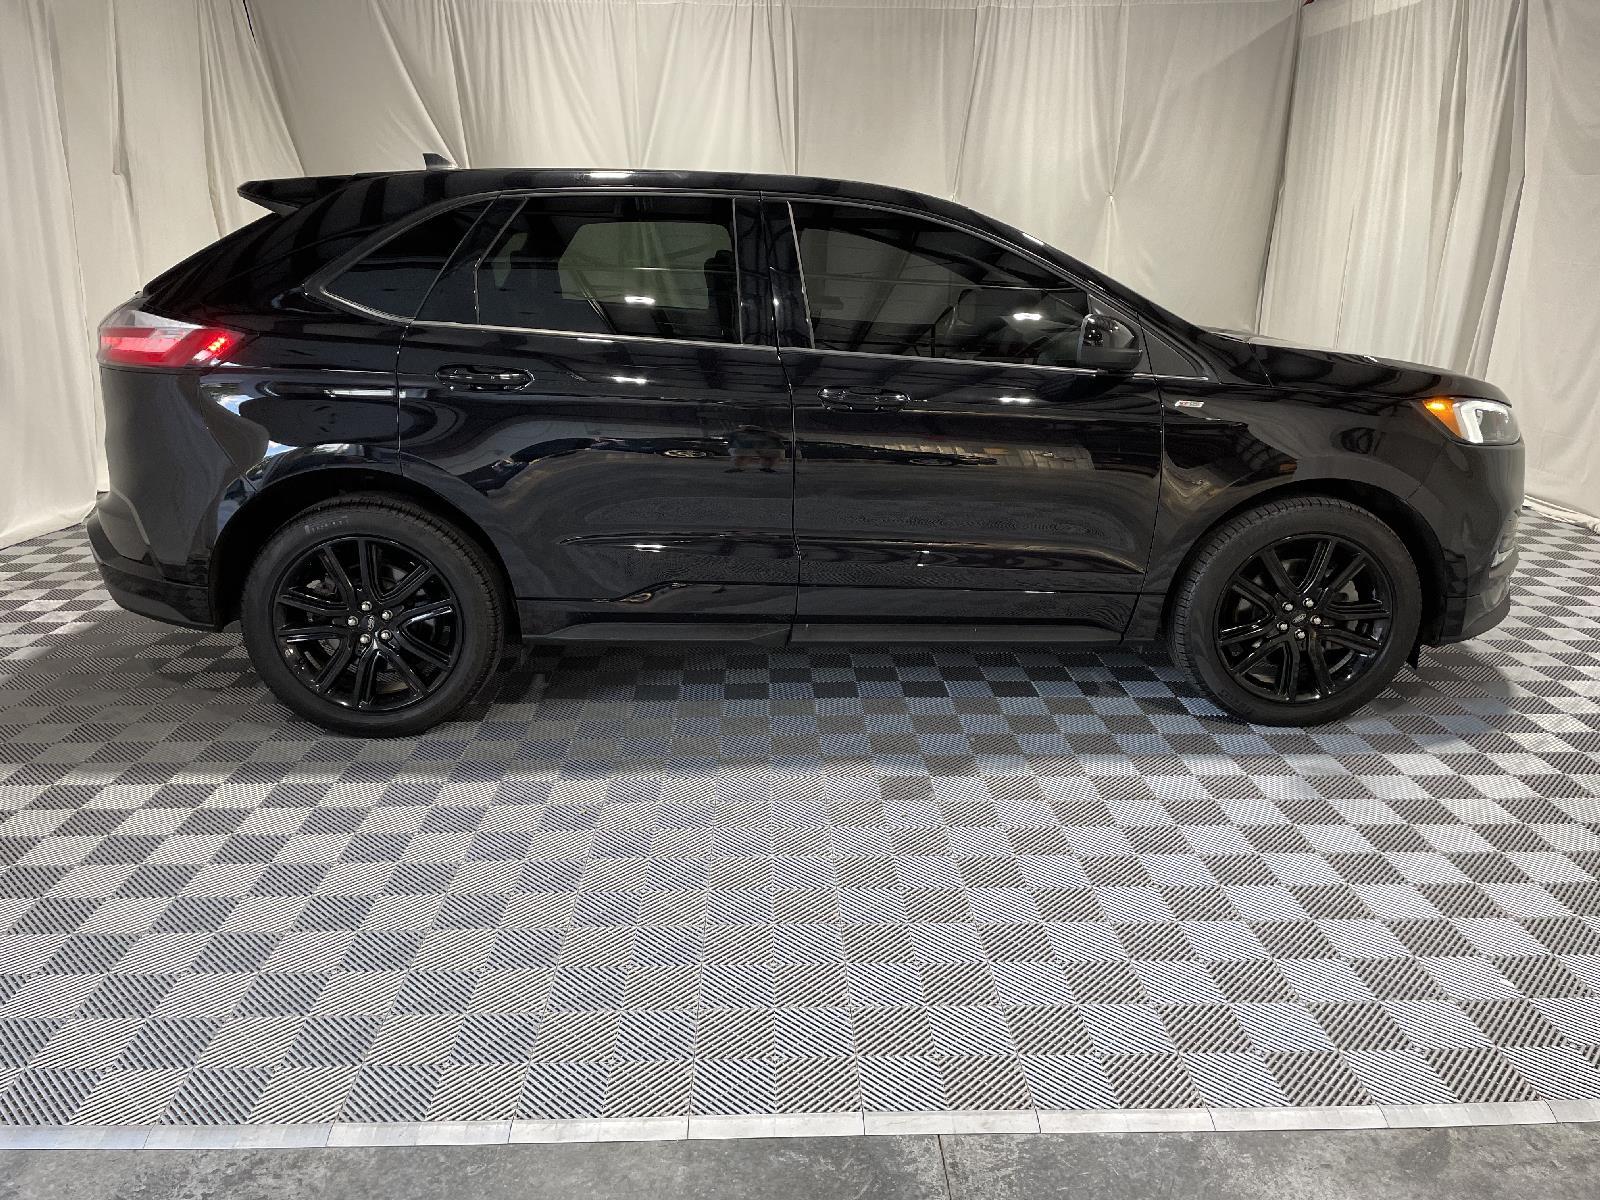 Used 2022 Ford Edge SEL/ST-Line wagon 4 dr. for sale in St Joseph MO